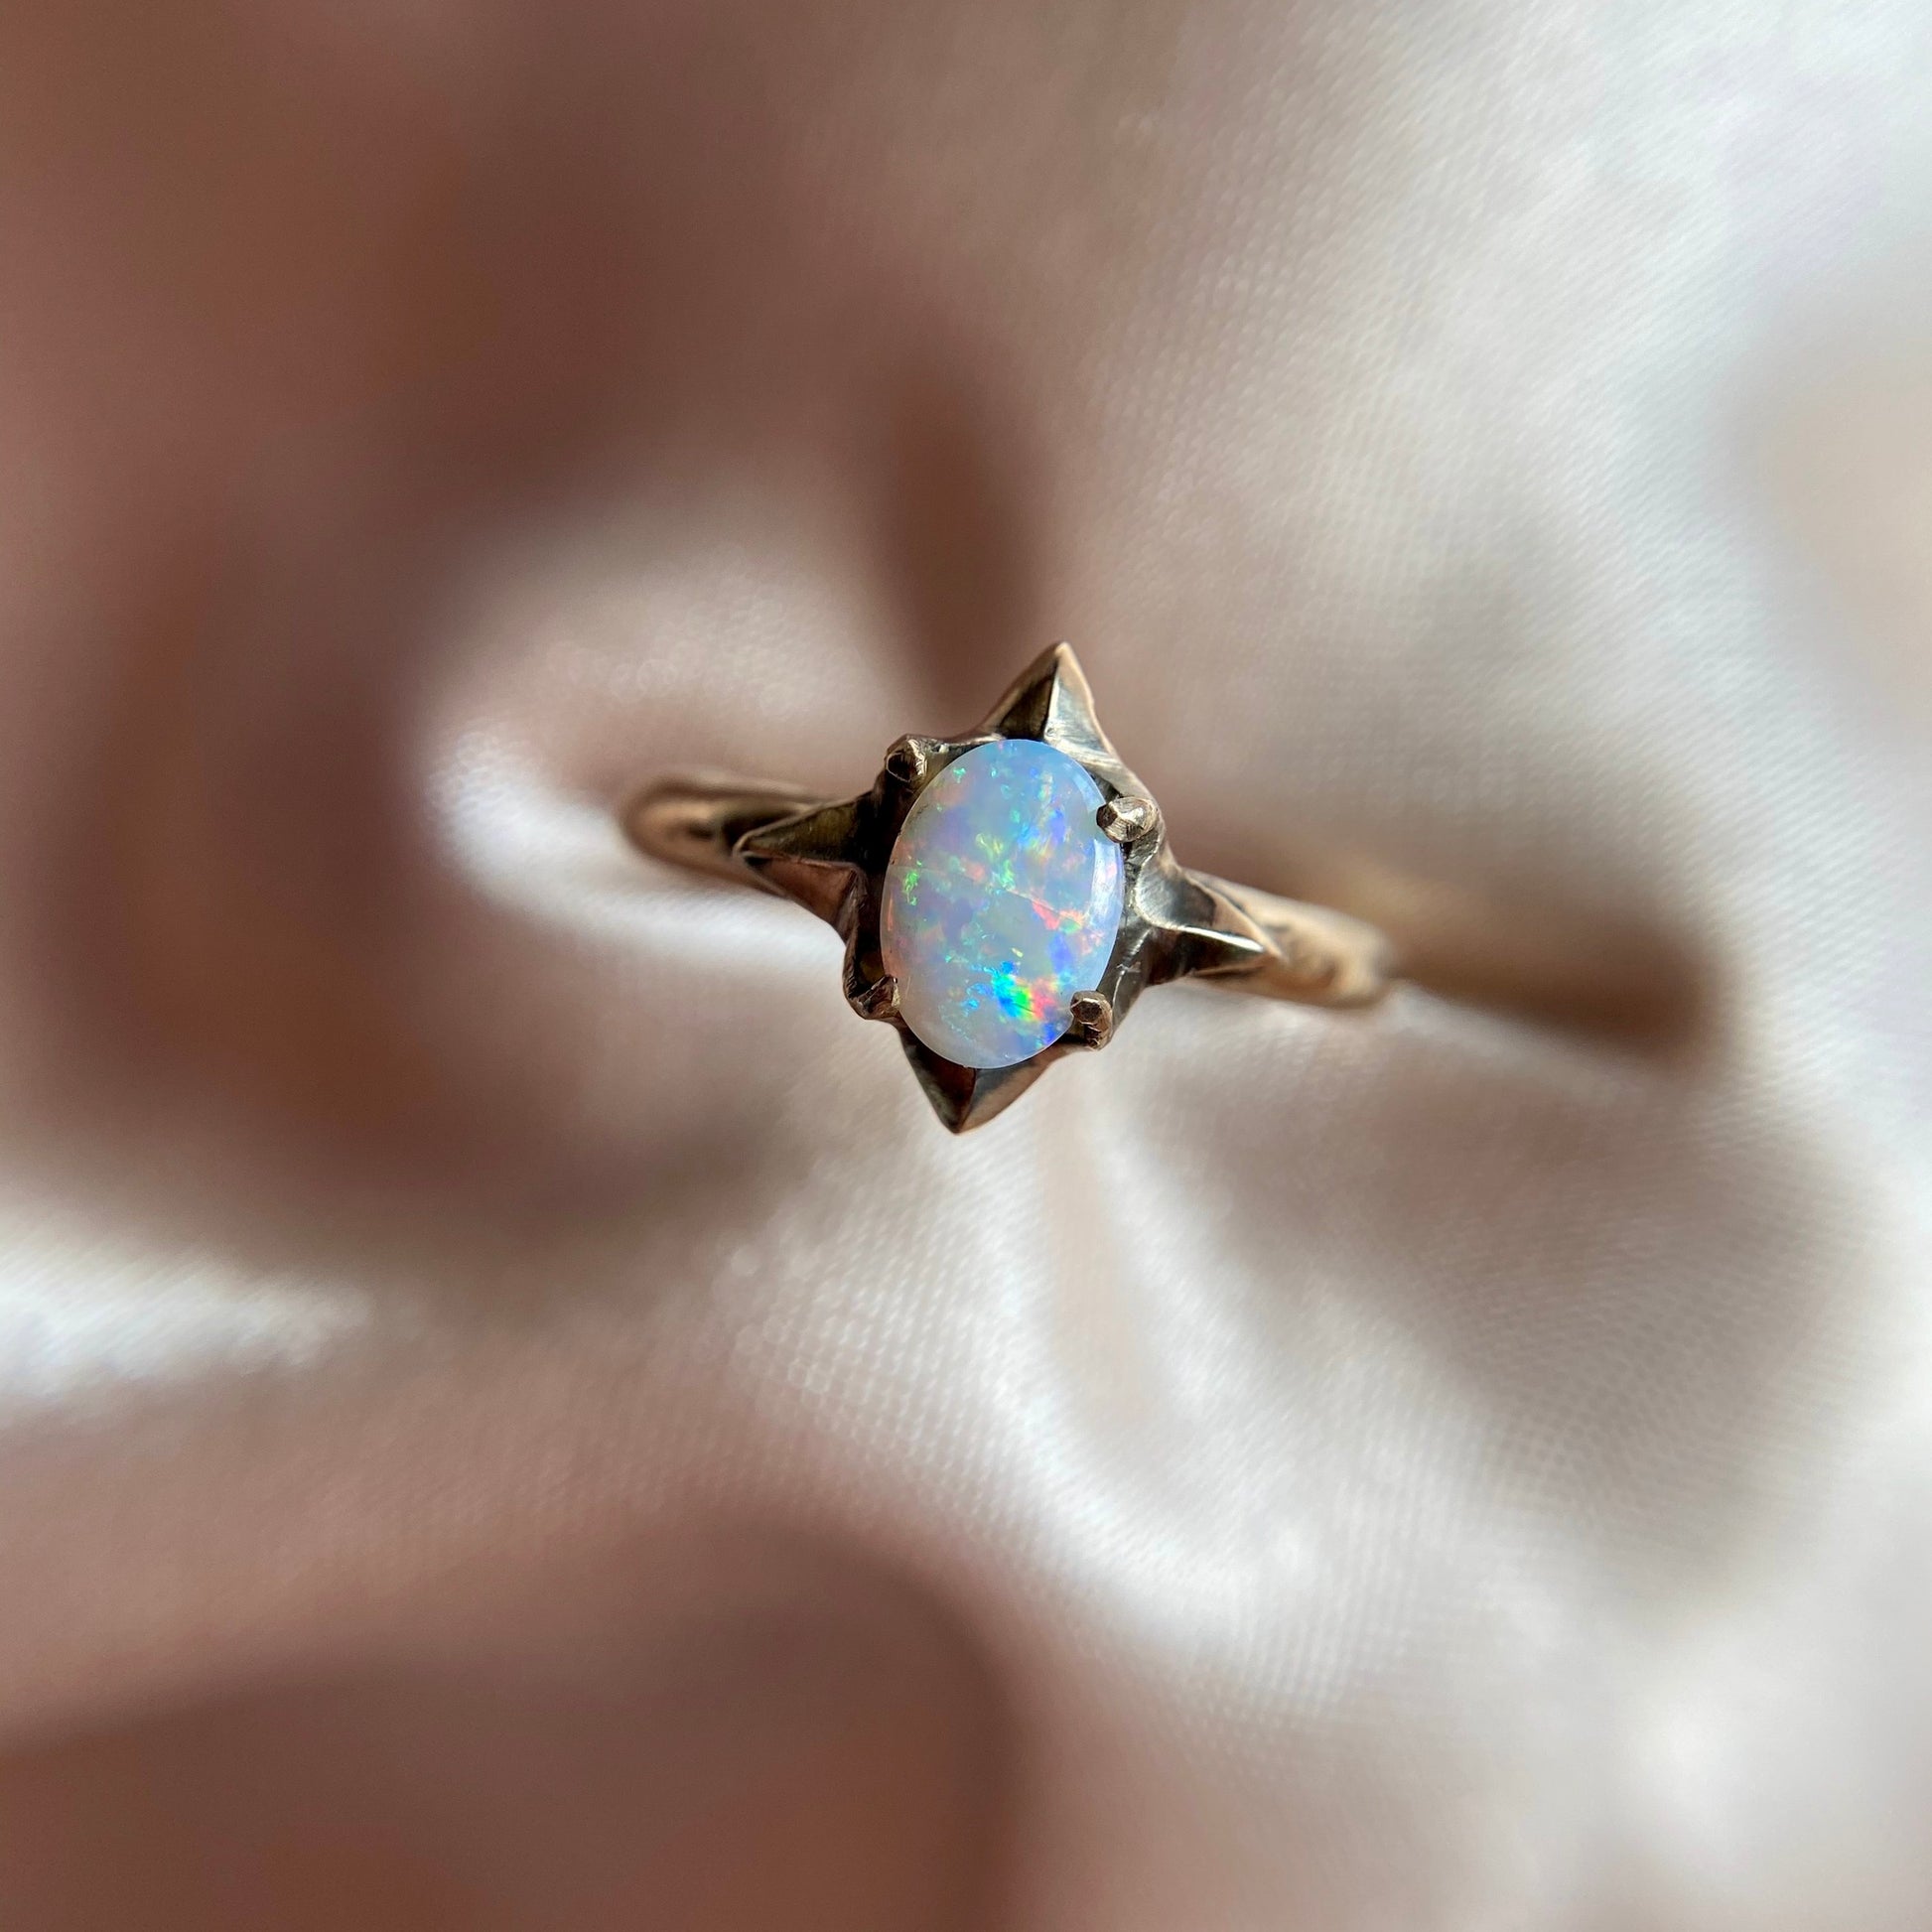 Stardust Opal ring set with ethically sourced natural Australian opal by Iron Oxide Designs